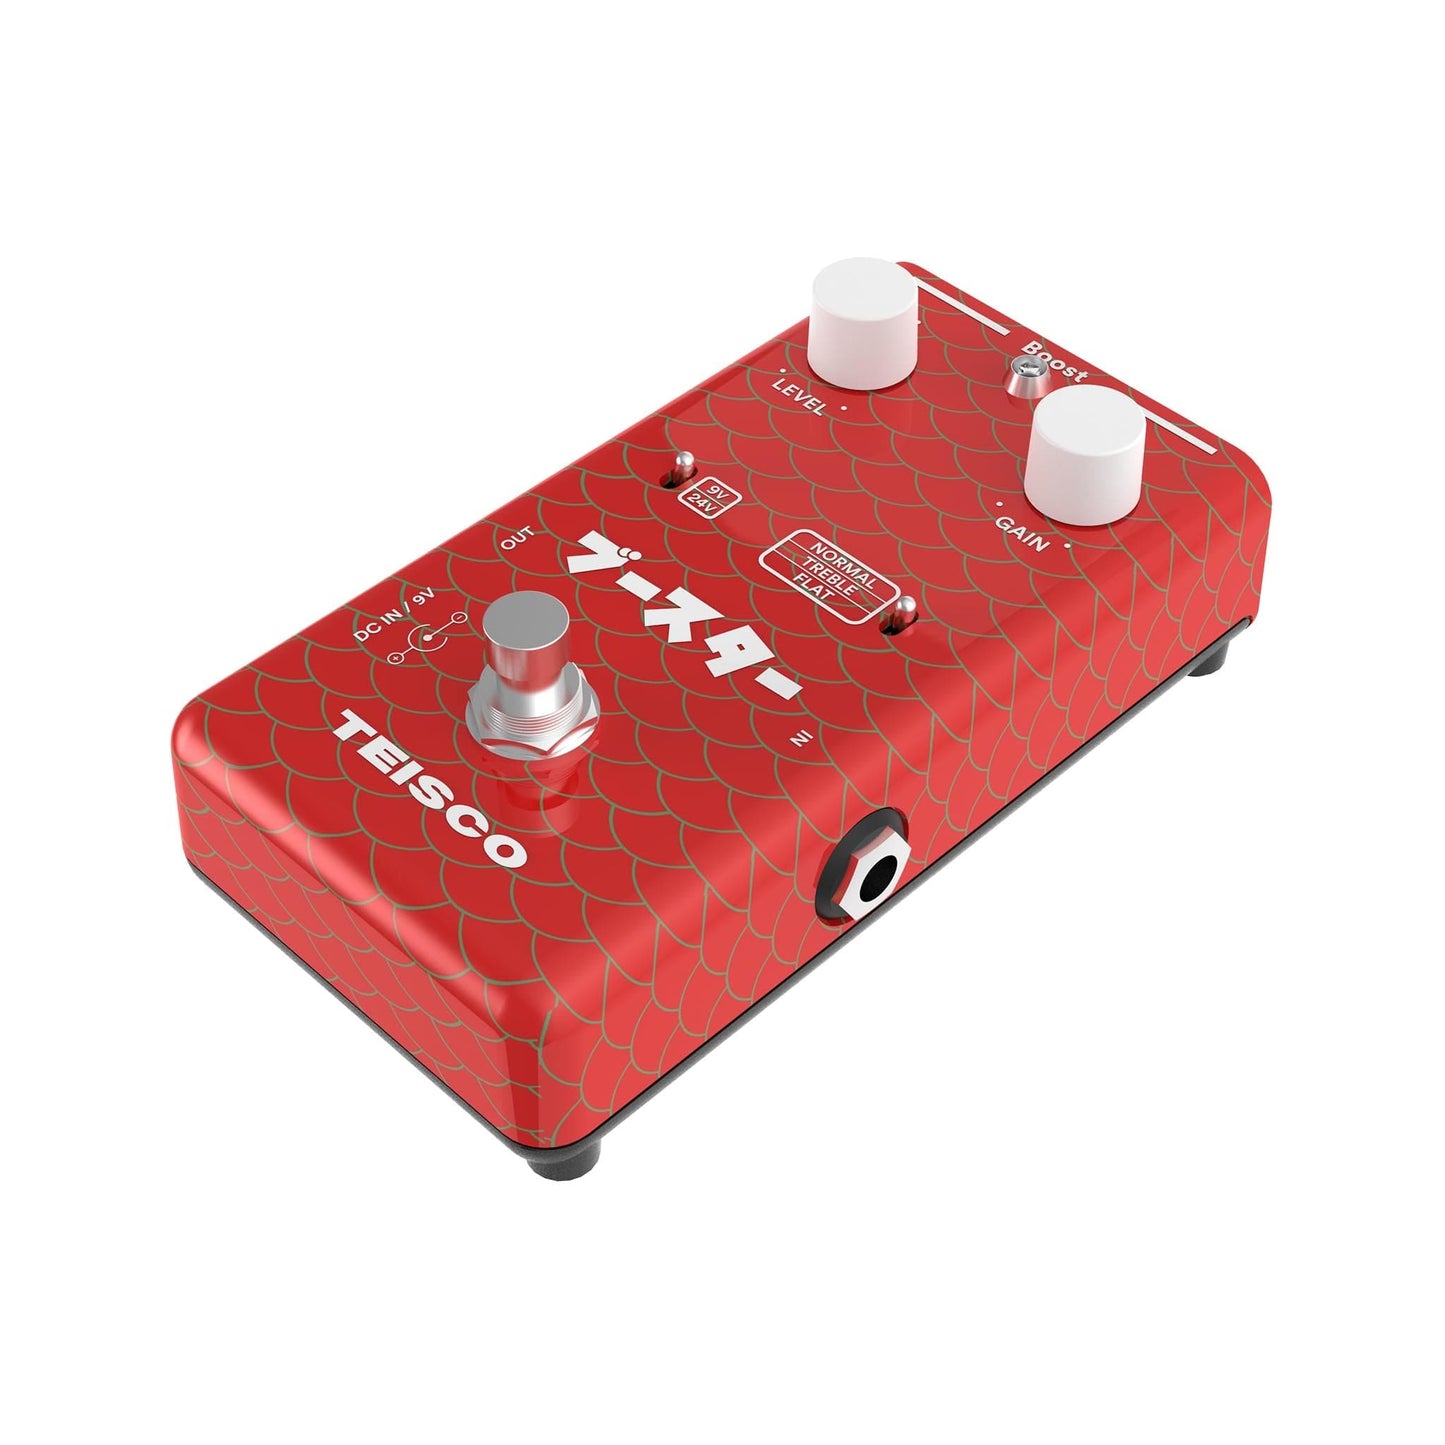 Teisco Boost pedal